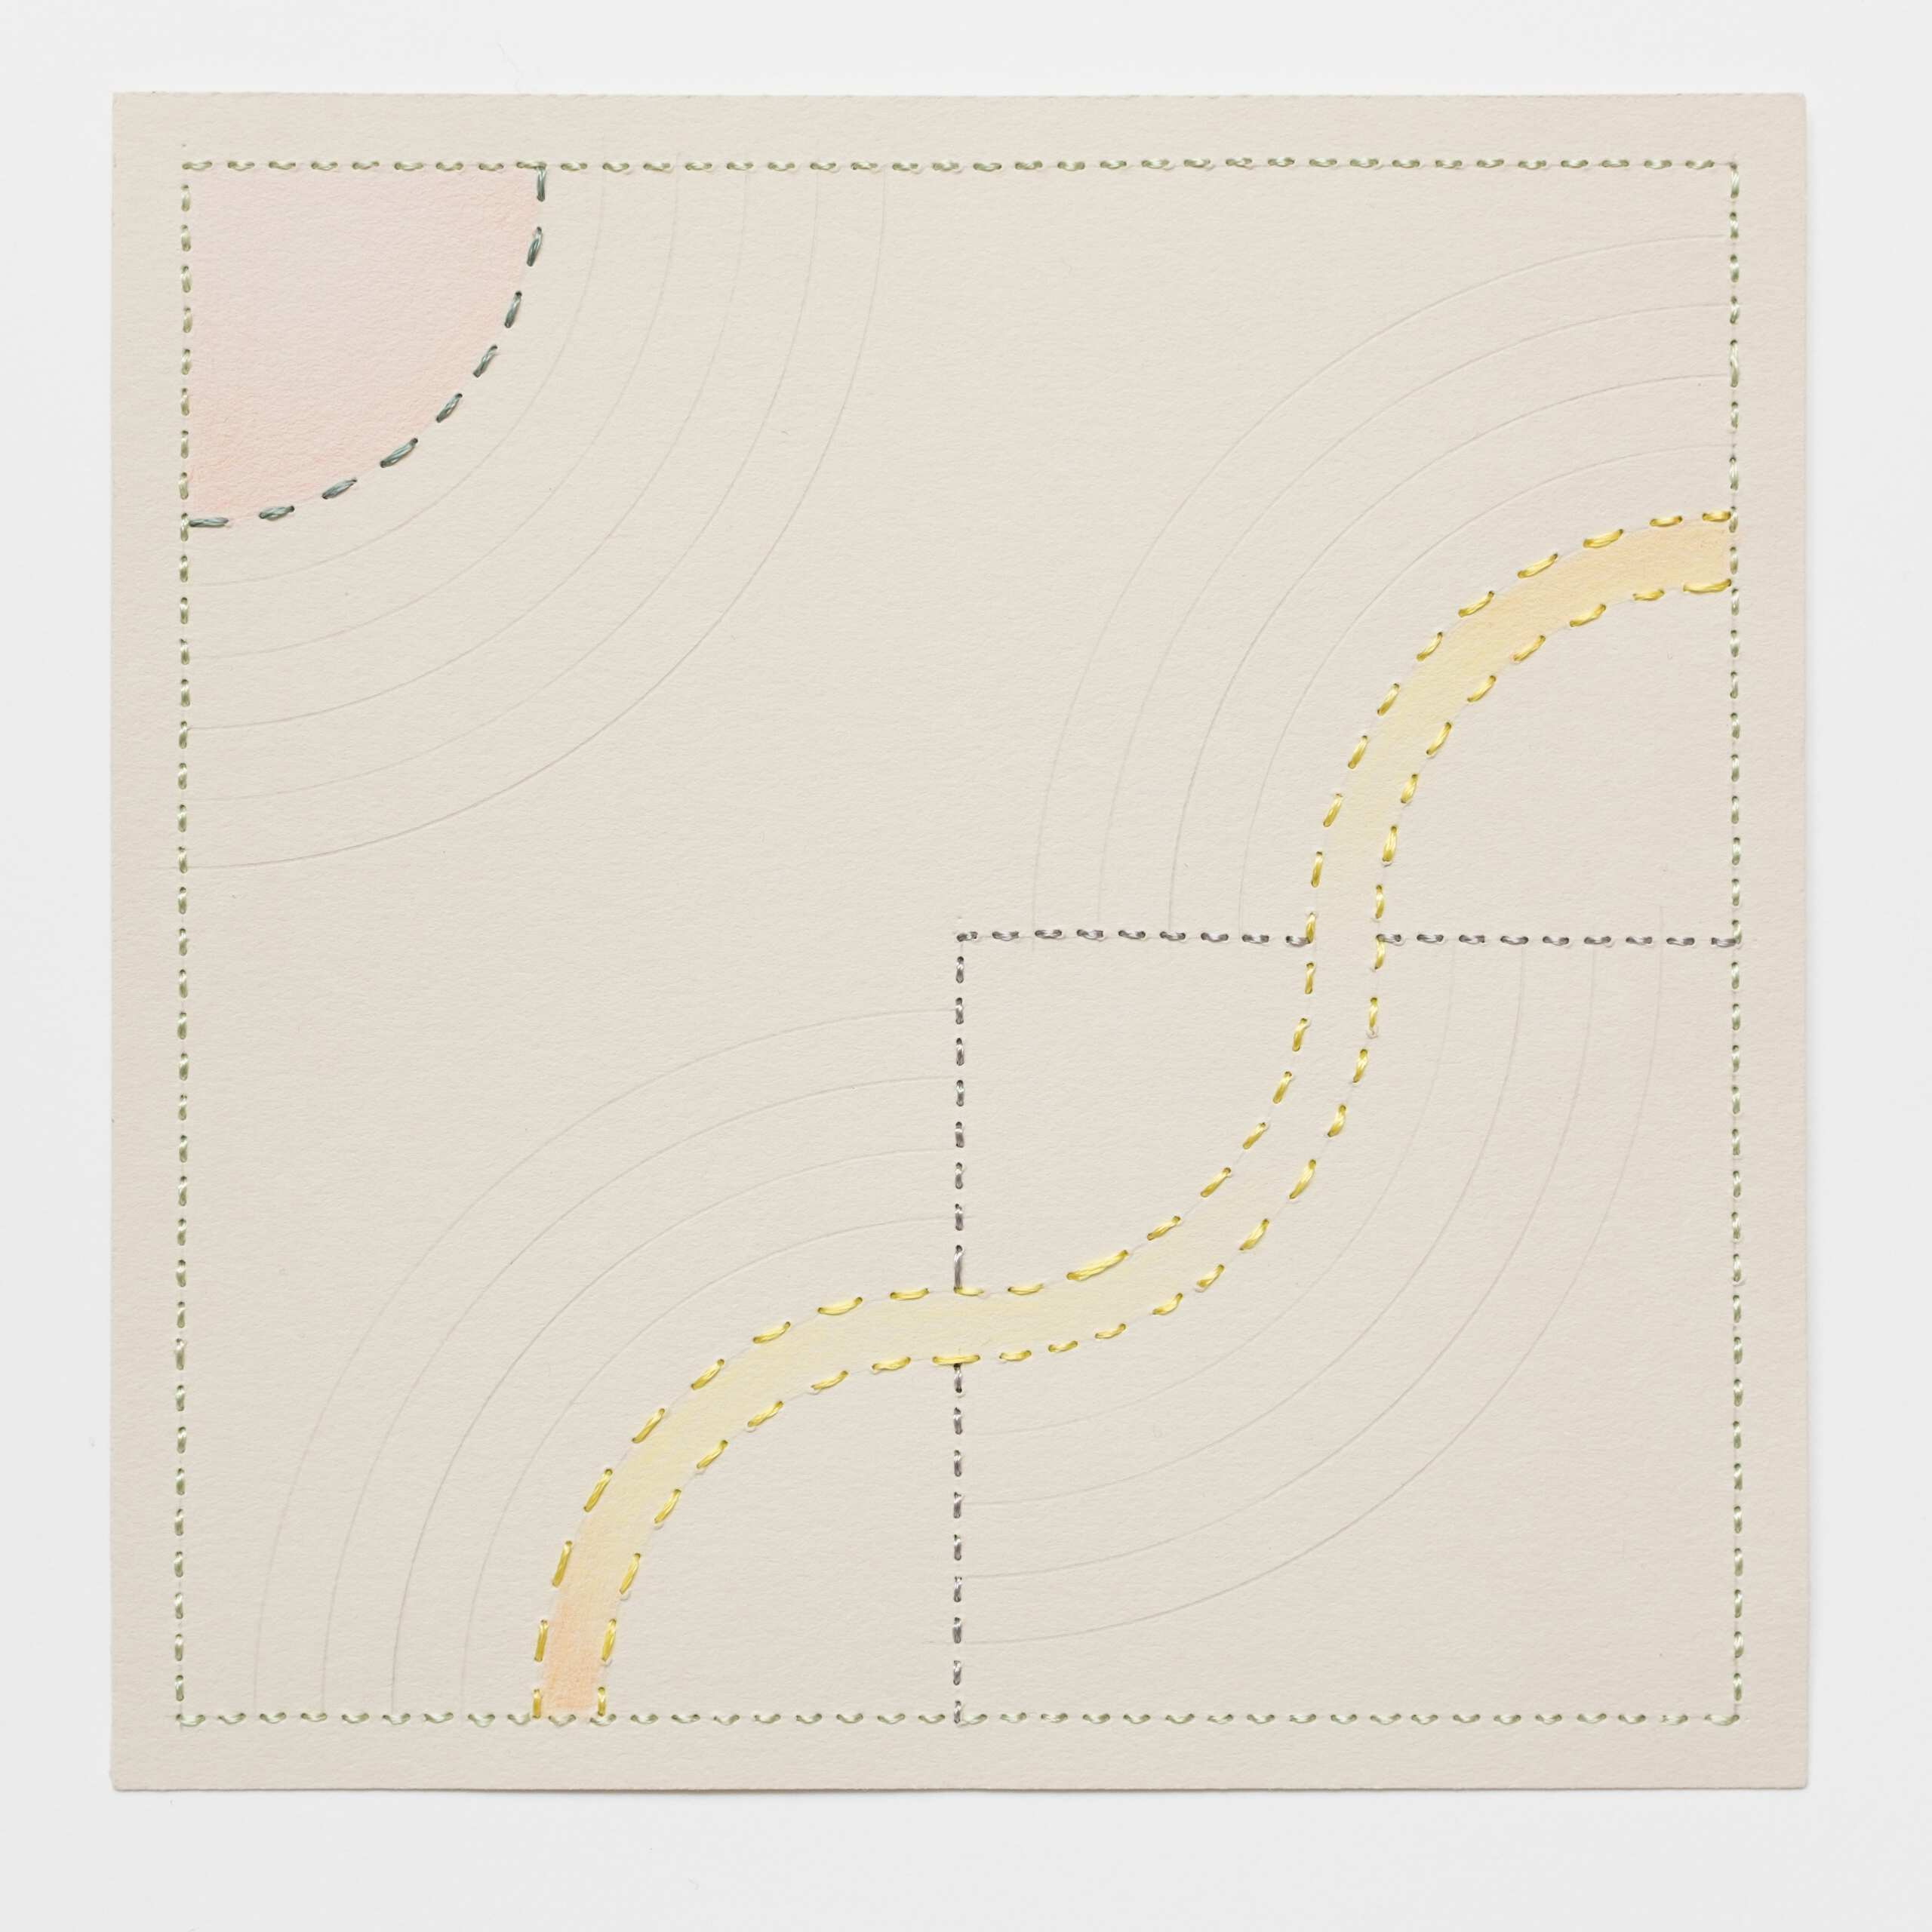 Quilted Composition [grey // rainbows], Hand-embroidered silk thread, pencil, and coloured pencil on paper, 2019